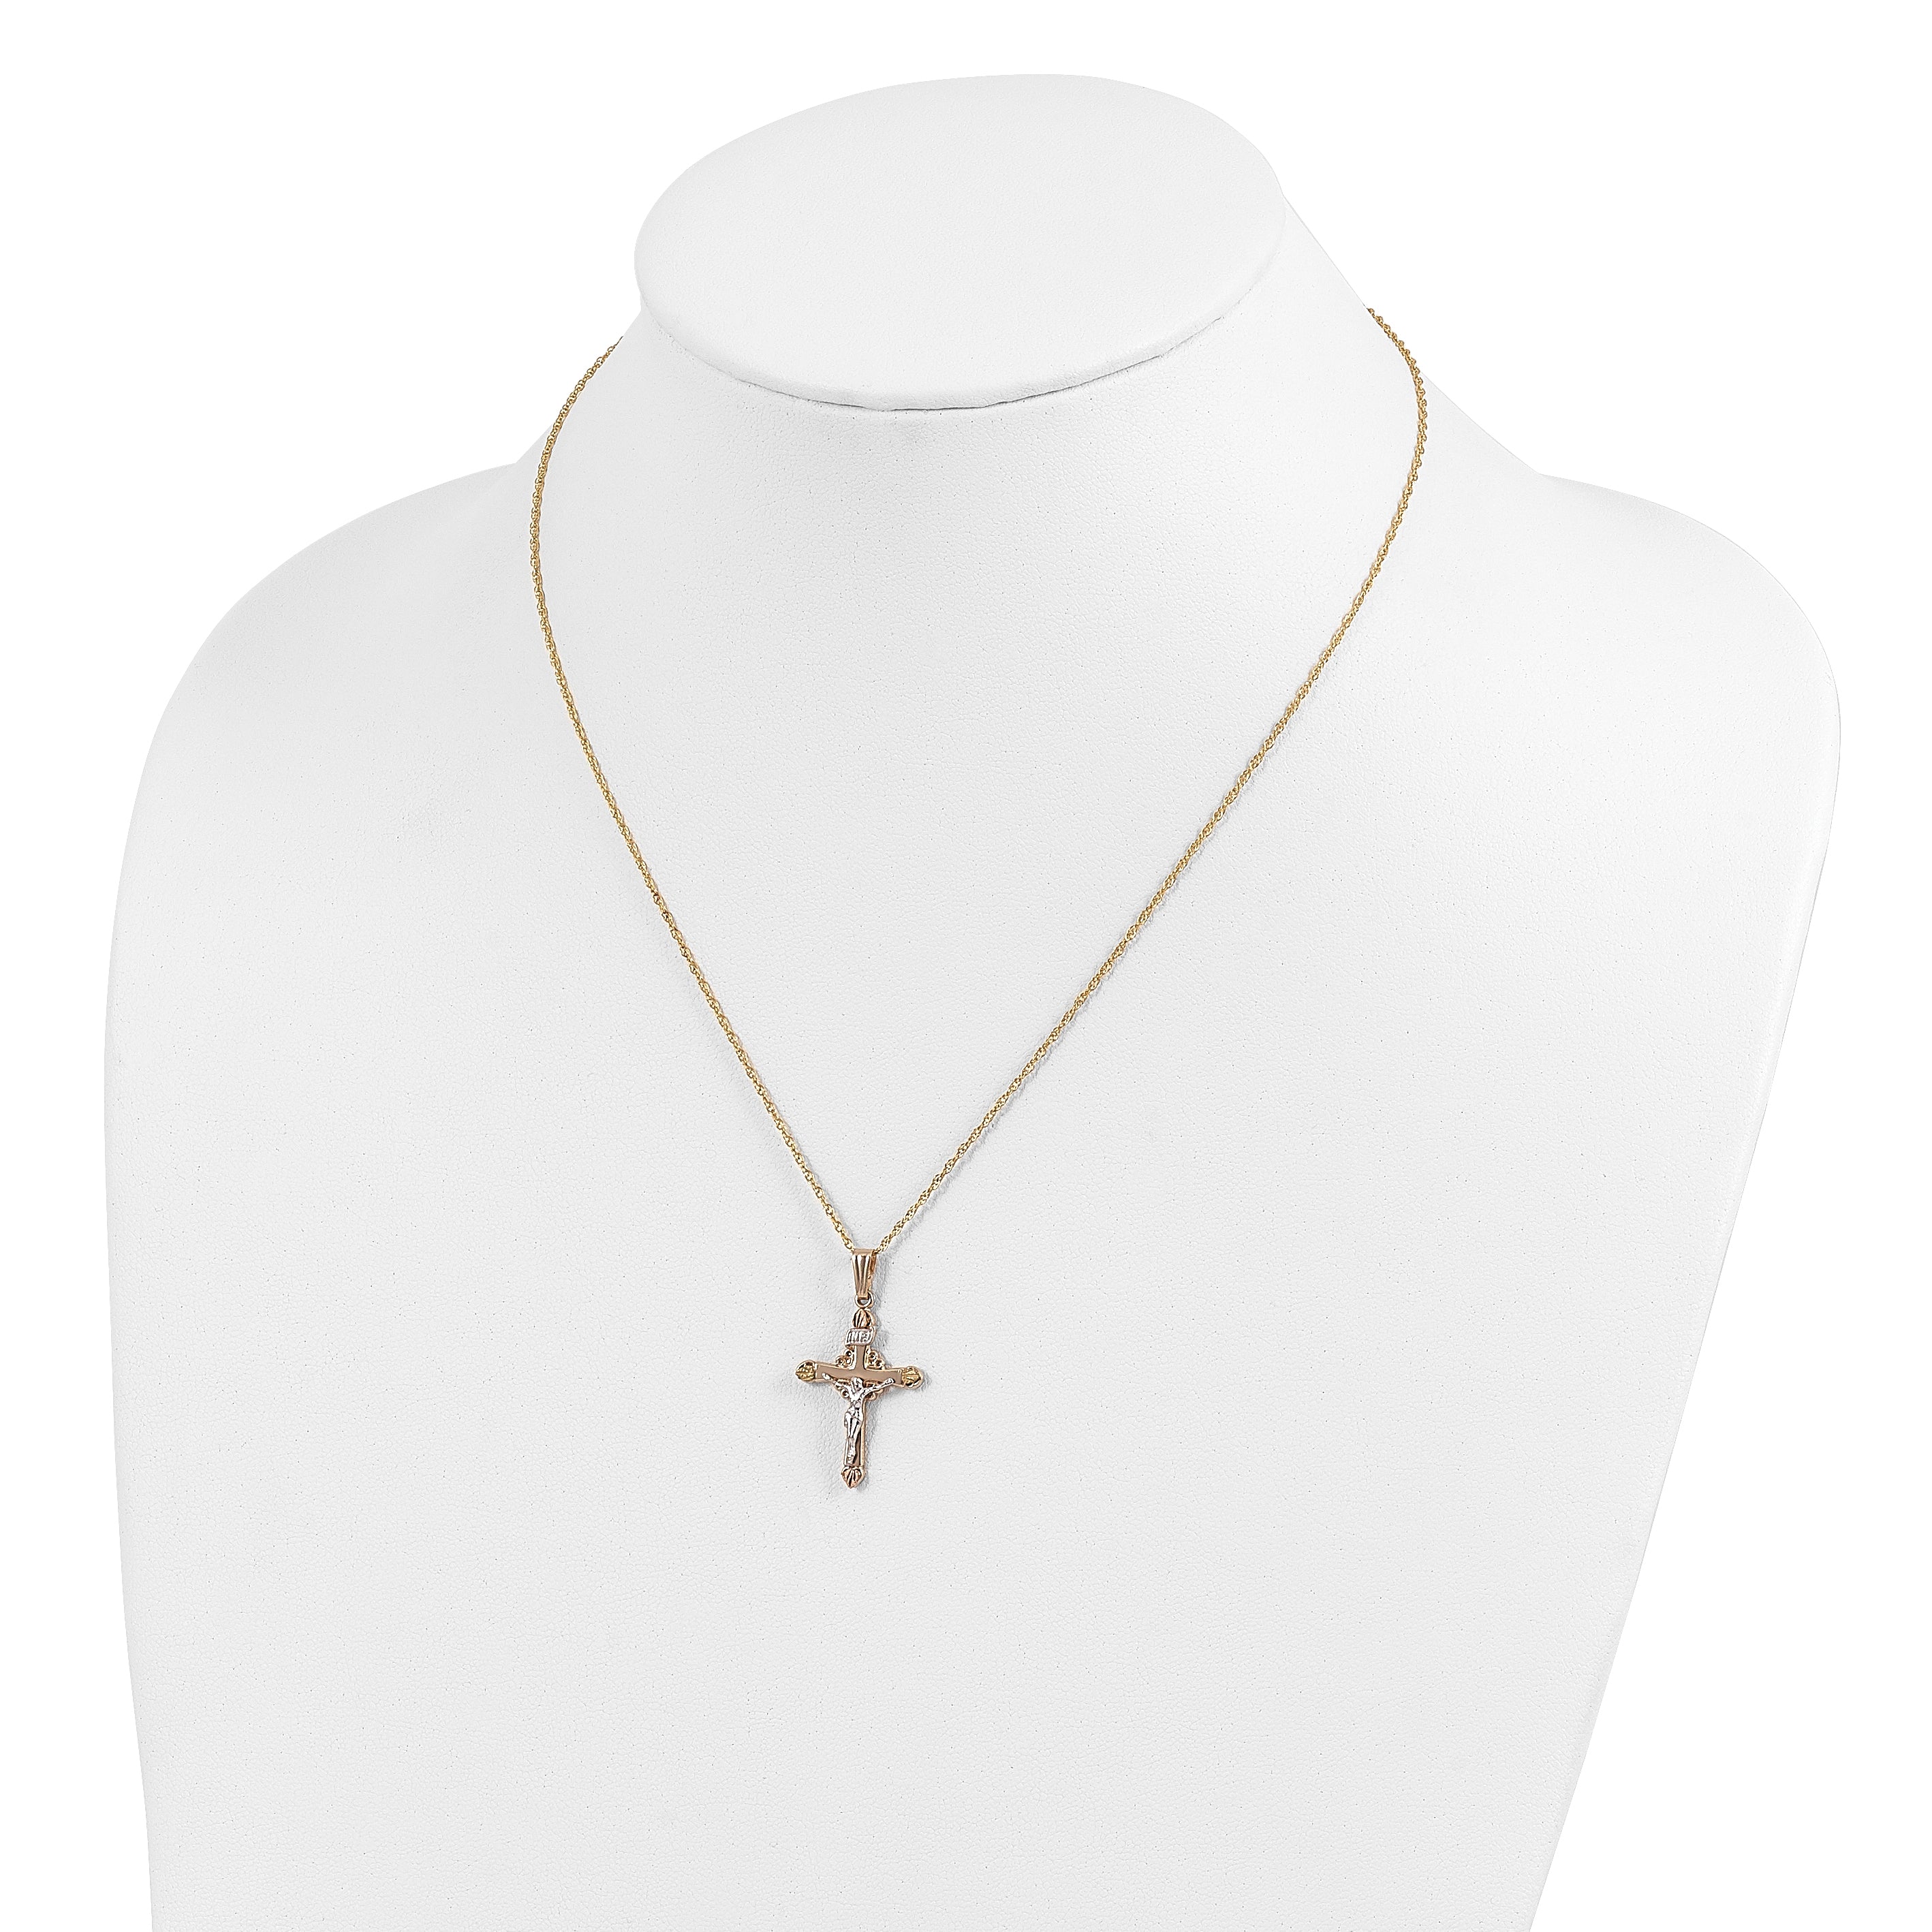 10k & 14k Gold Filled w/ 12k Accents Cross Necklace